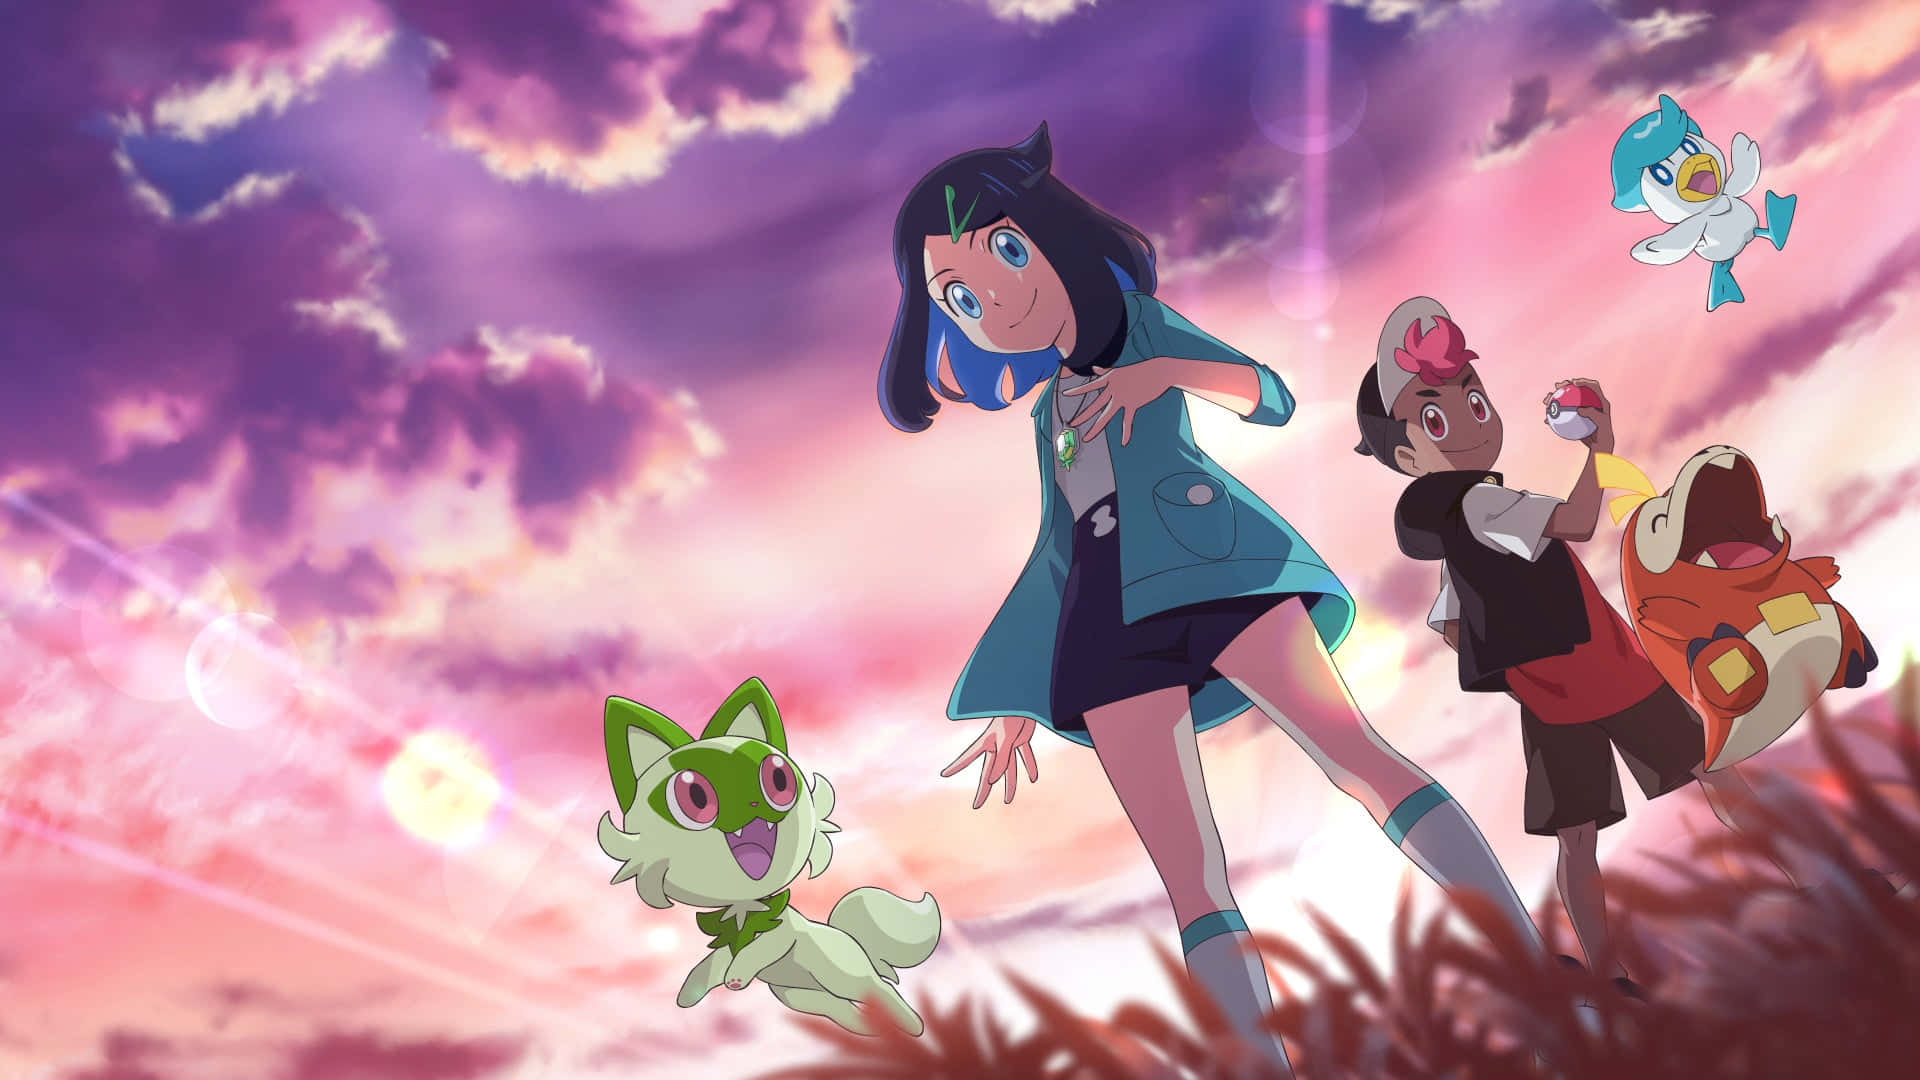 Grab your tickets and join the beloved heroes Ash, Misty and Brock on their quest to become the greatest Pokemon Masters! Wallpaper